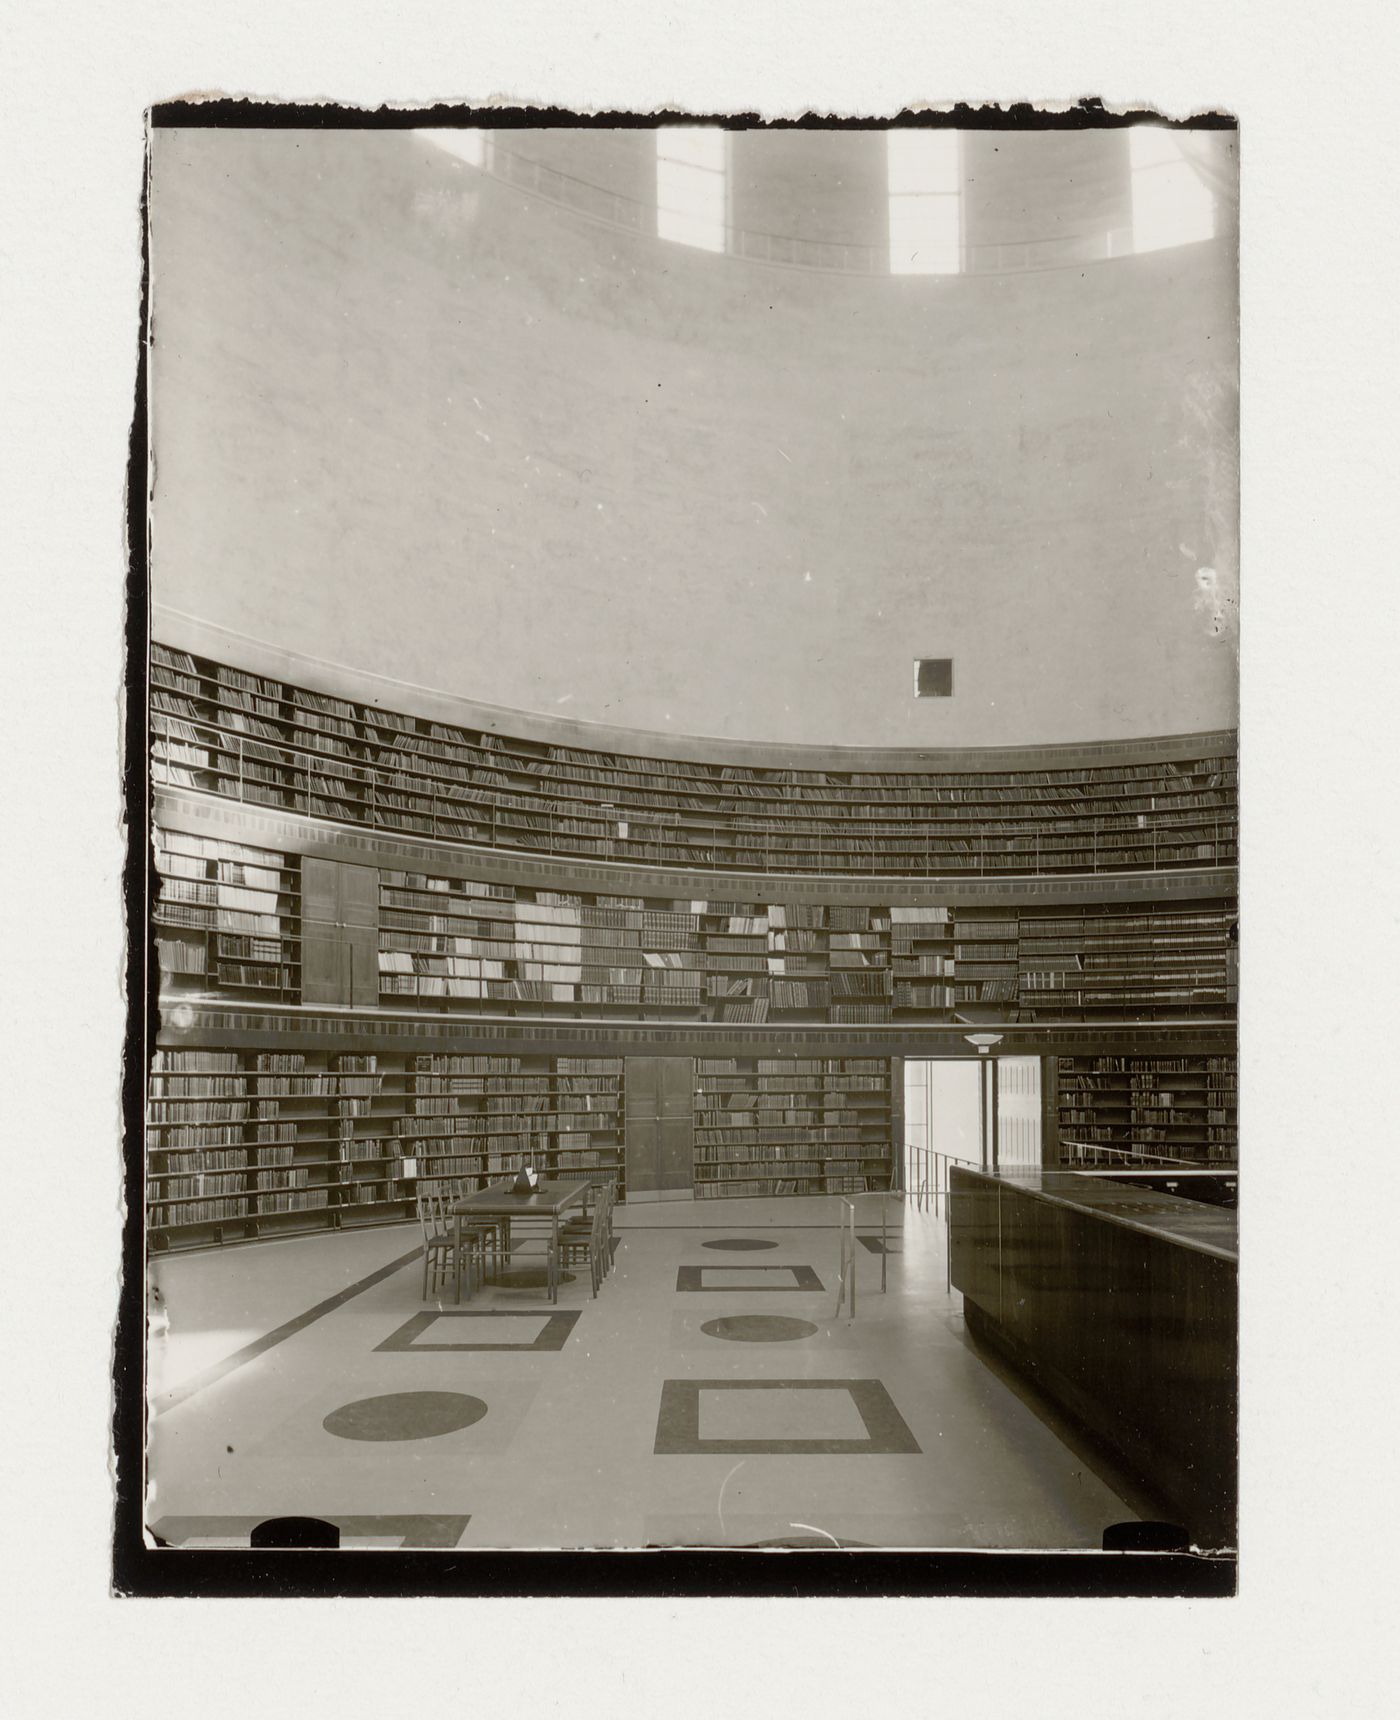 Interior view of the lending hall of Stockholm Public Library showing the ground floor and galleries, 51-55 Odengatan, Stockholm